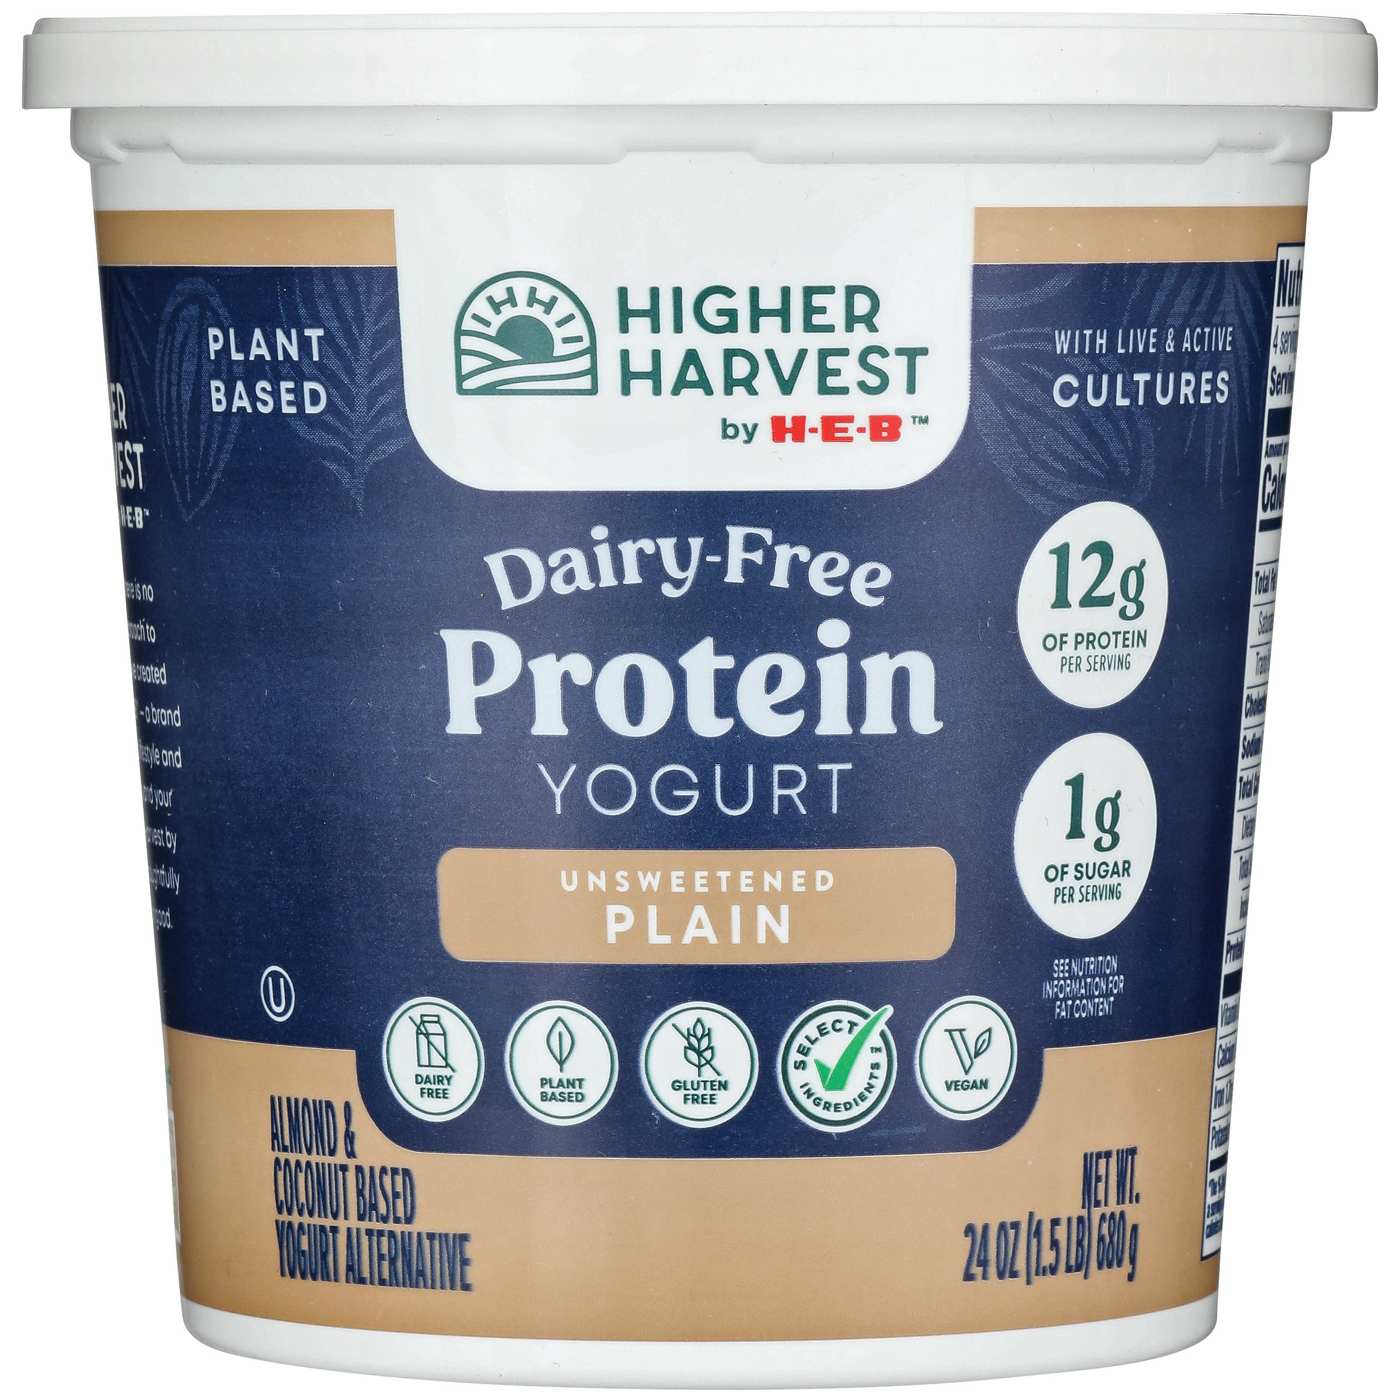 Higher Harvest by H-E-B Dairy Free Protein Yogurt – Unsweetened Plain; image 1 of 2